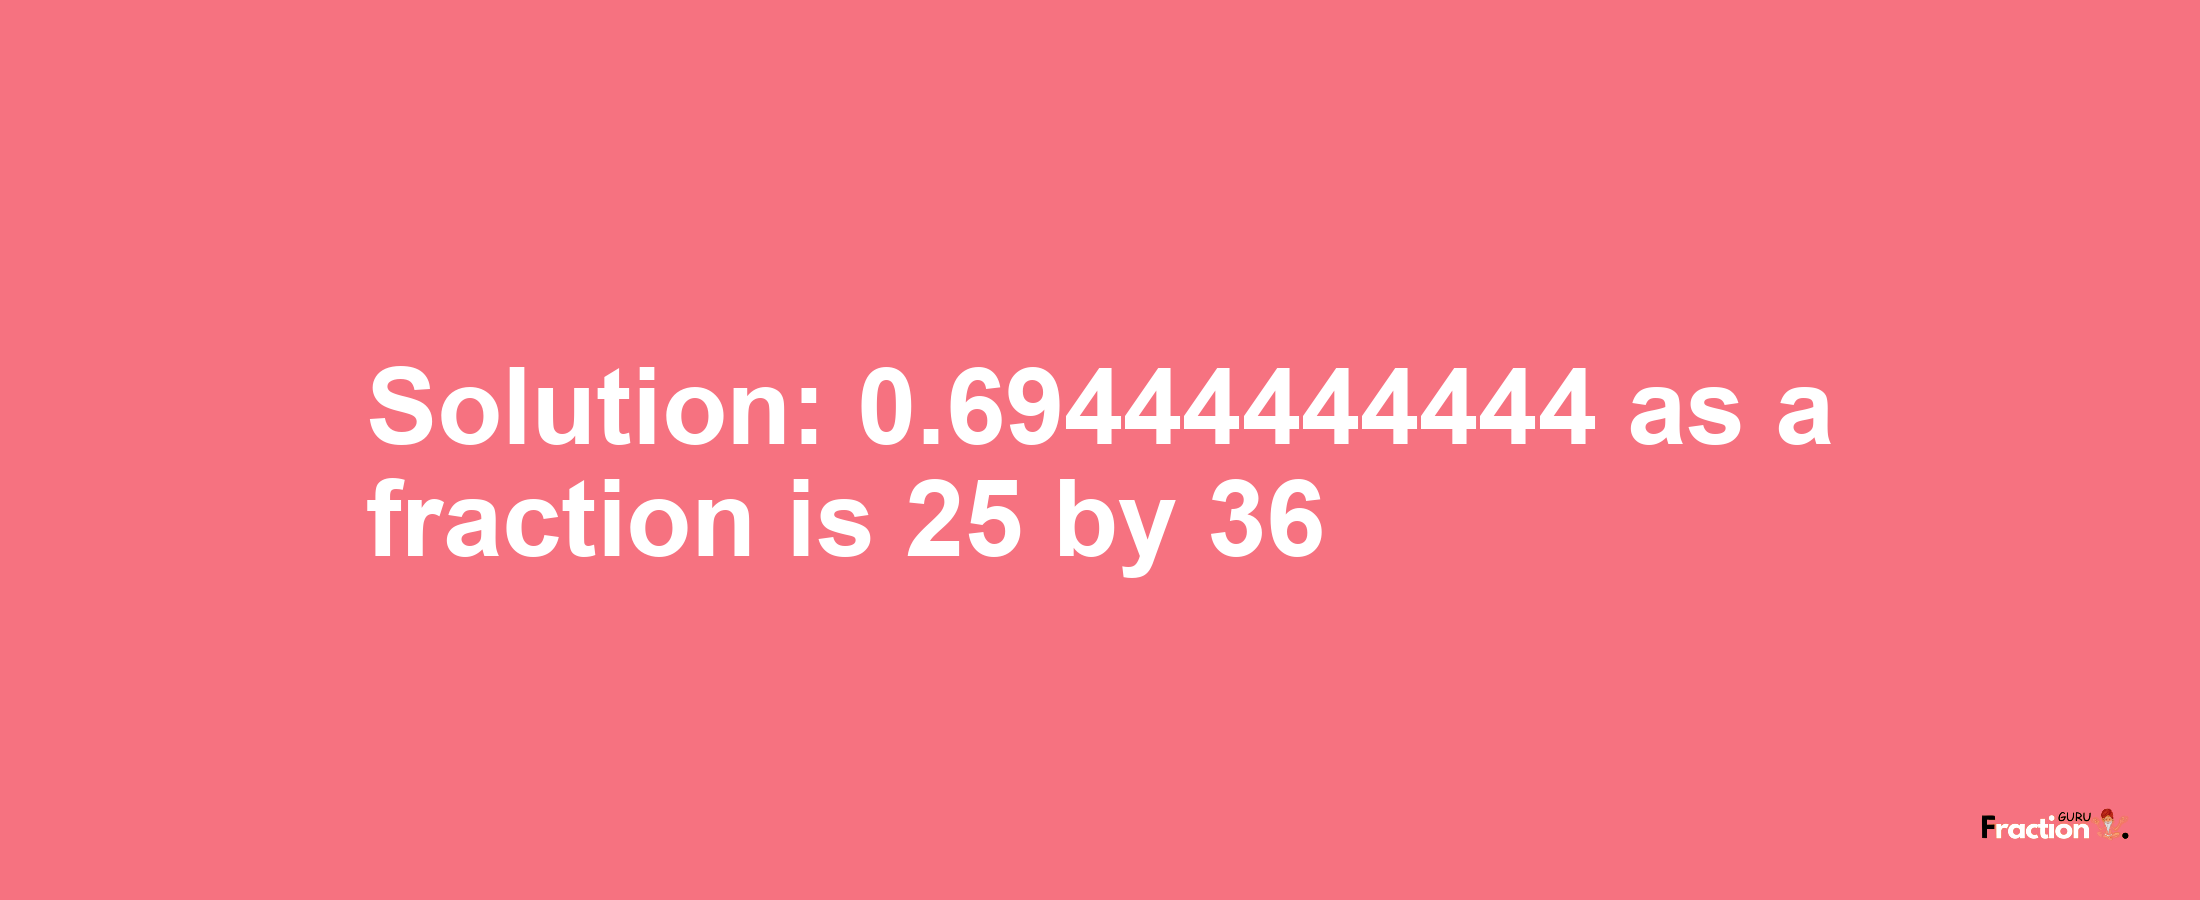 Solution:0.69444444444 as a fraction is 25/36